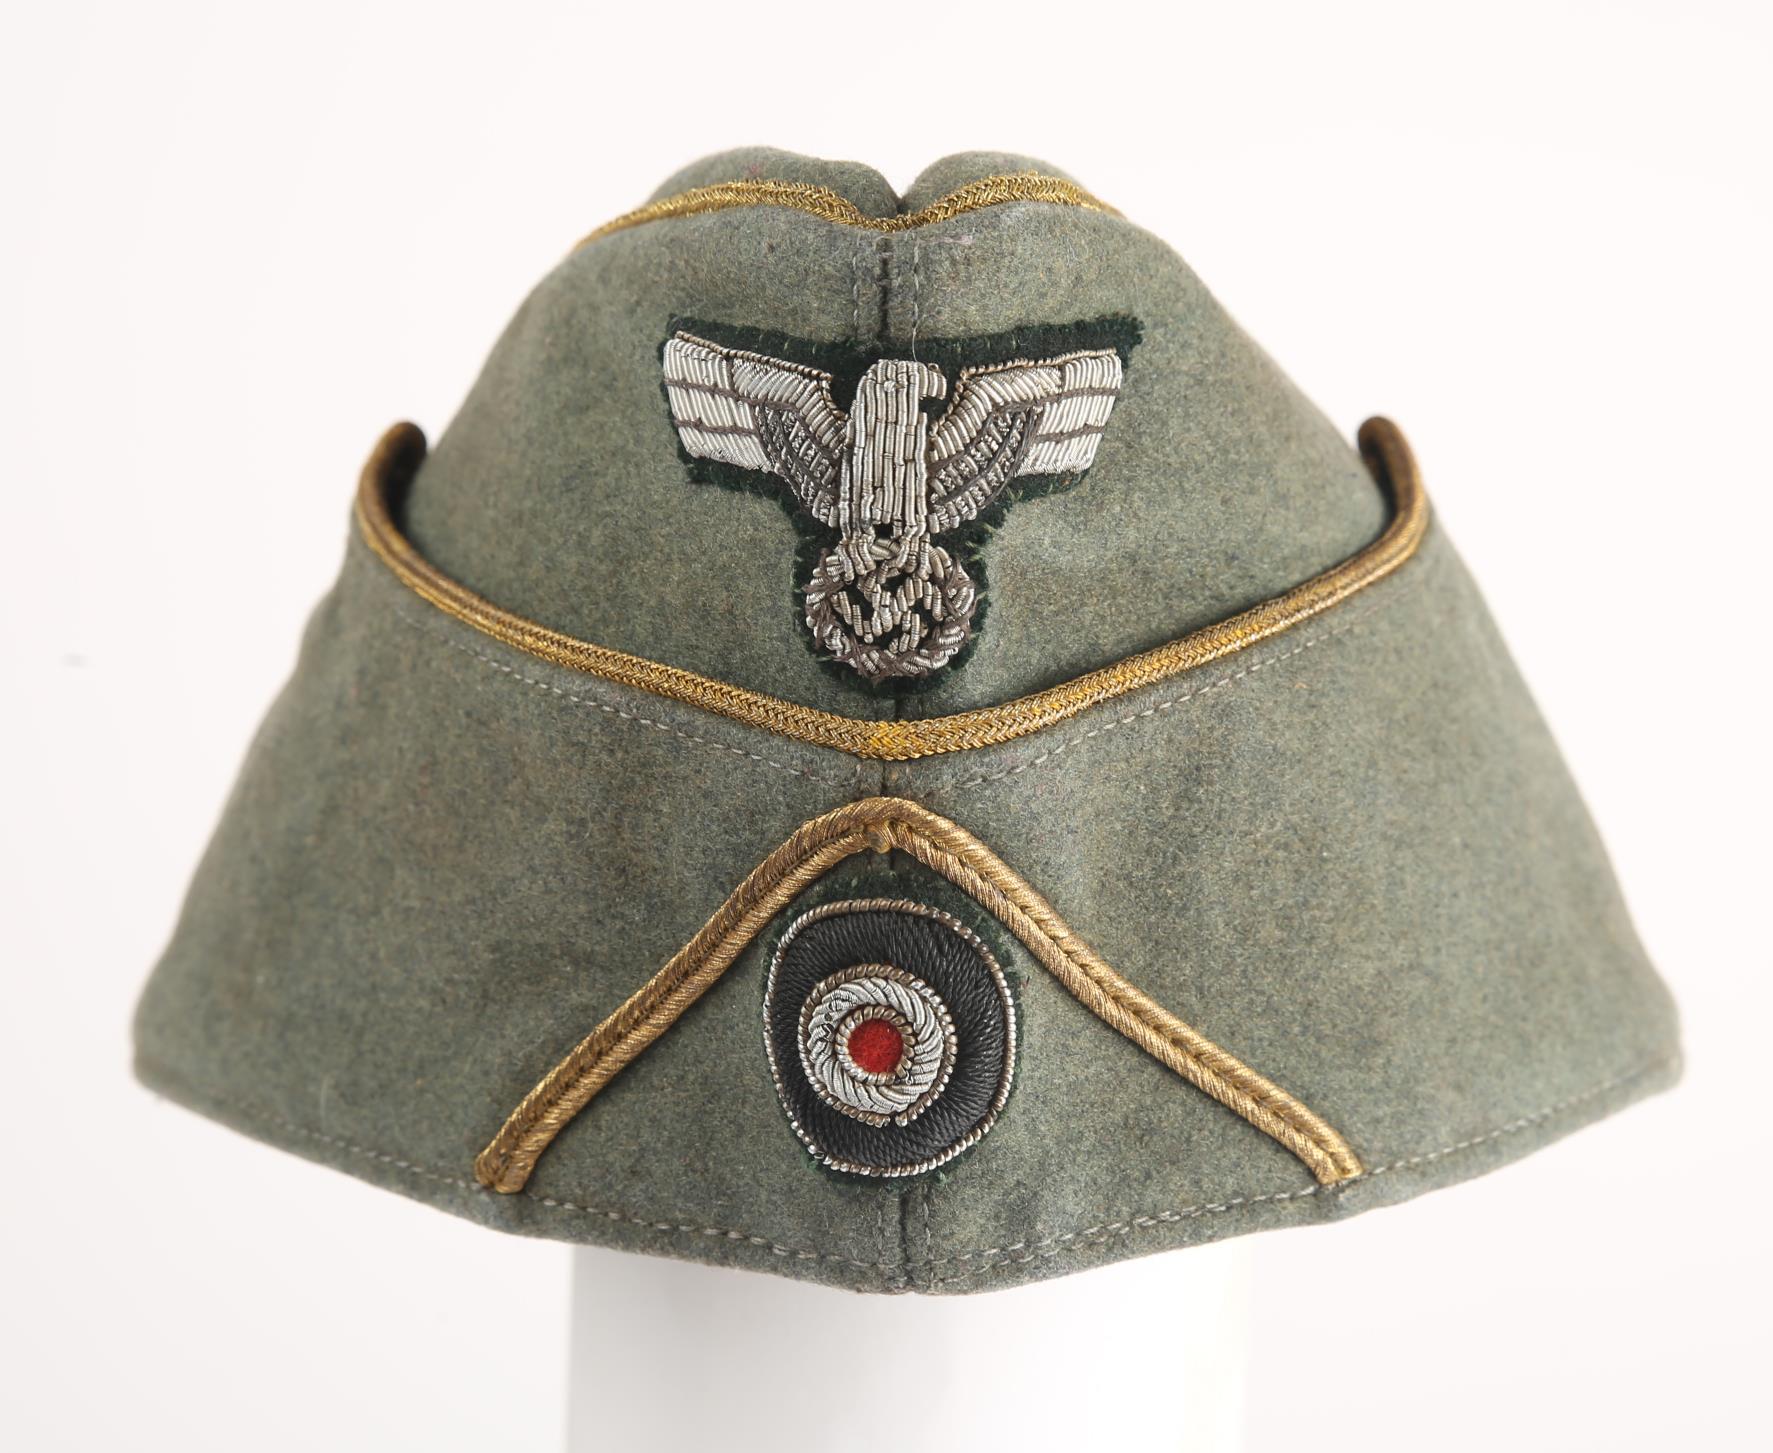 1933-42 German General's side cap. A privately purchased M38 field cap, piped in gilt bullion.